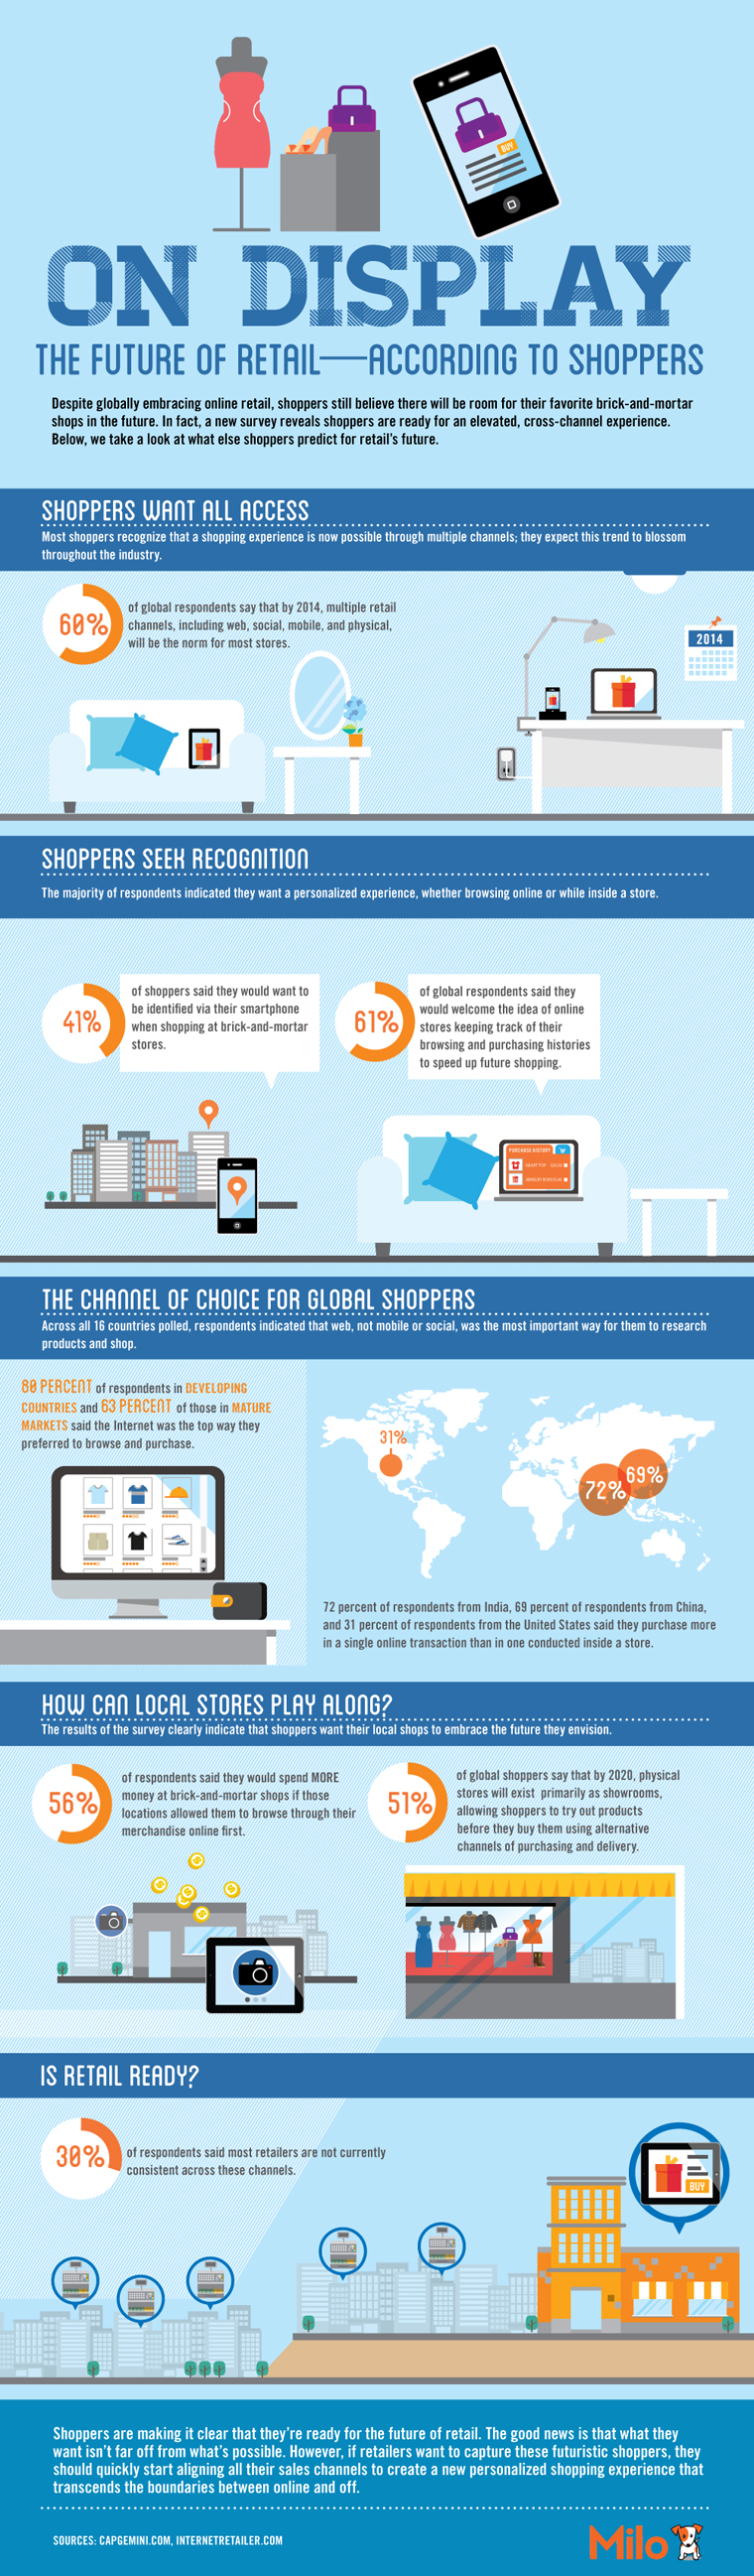 The Future of Retail infographic